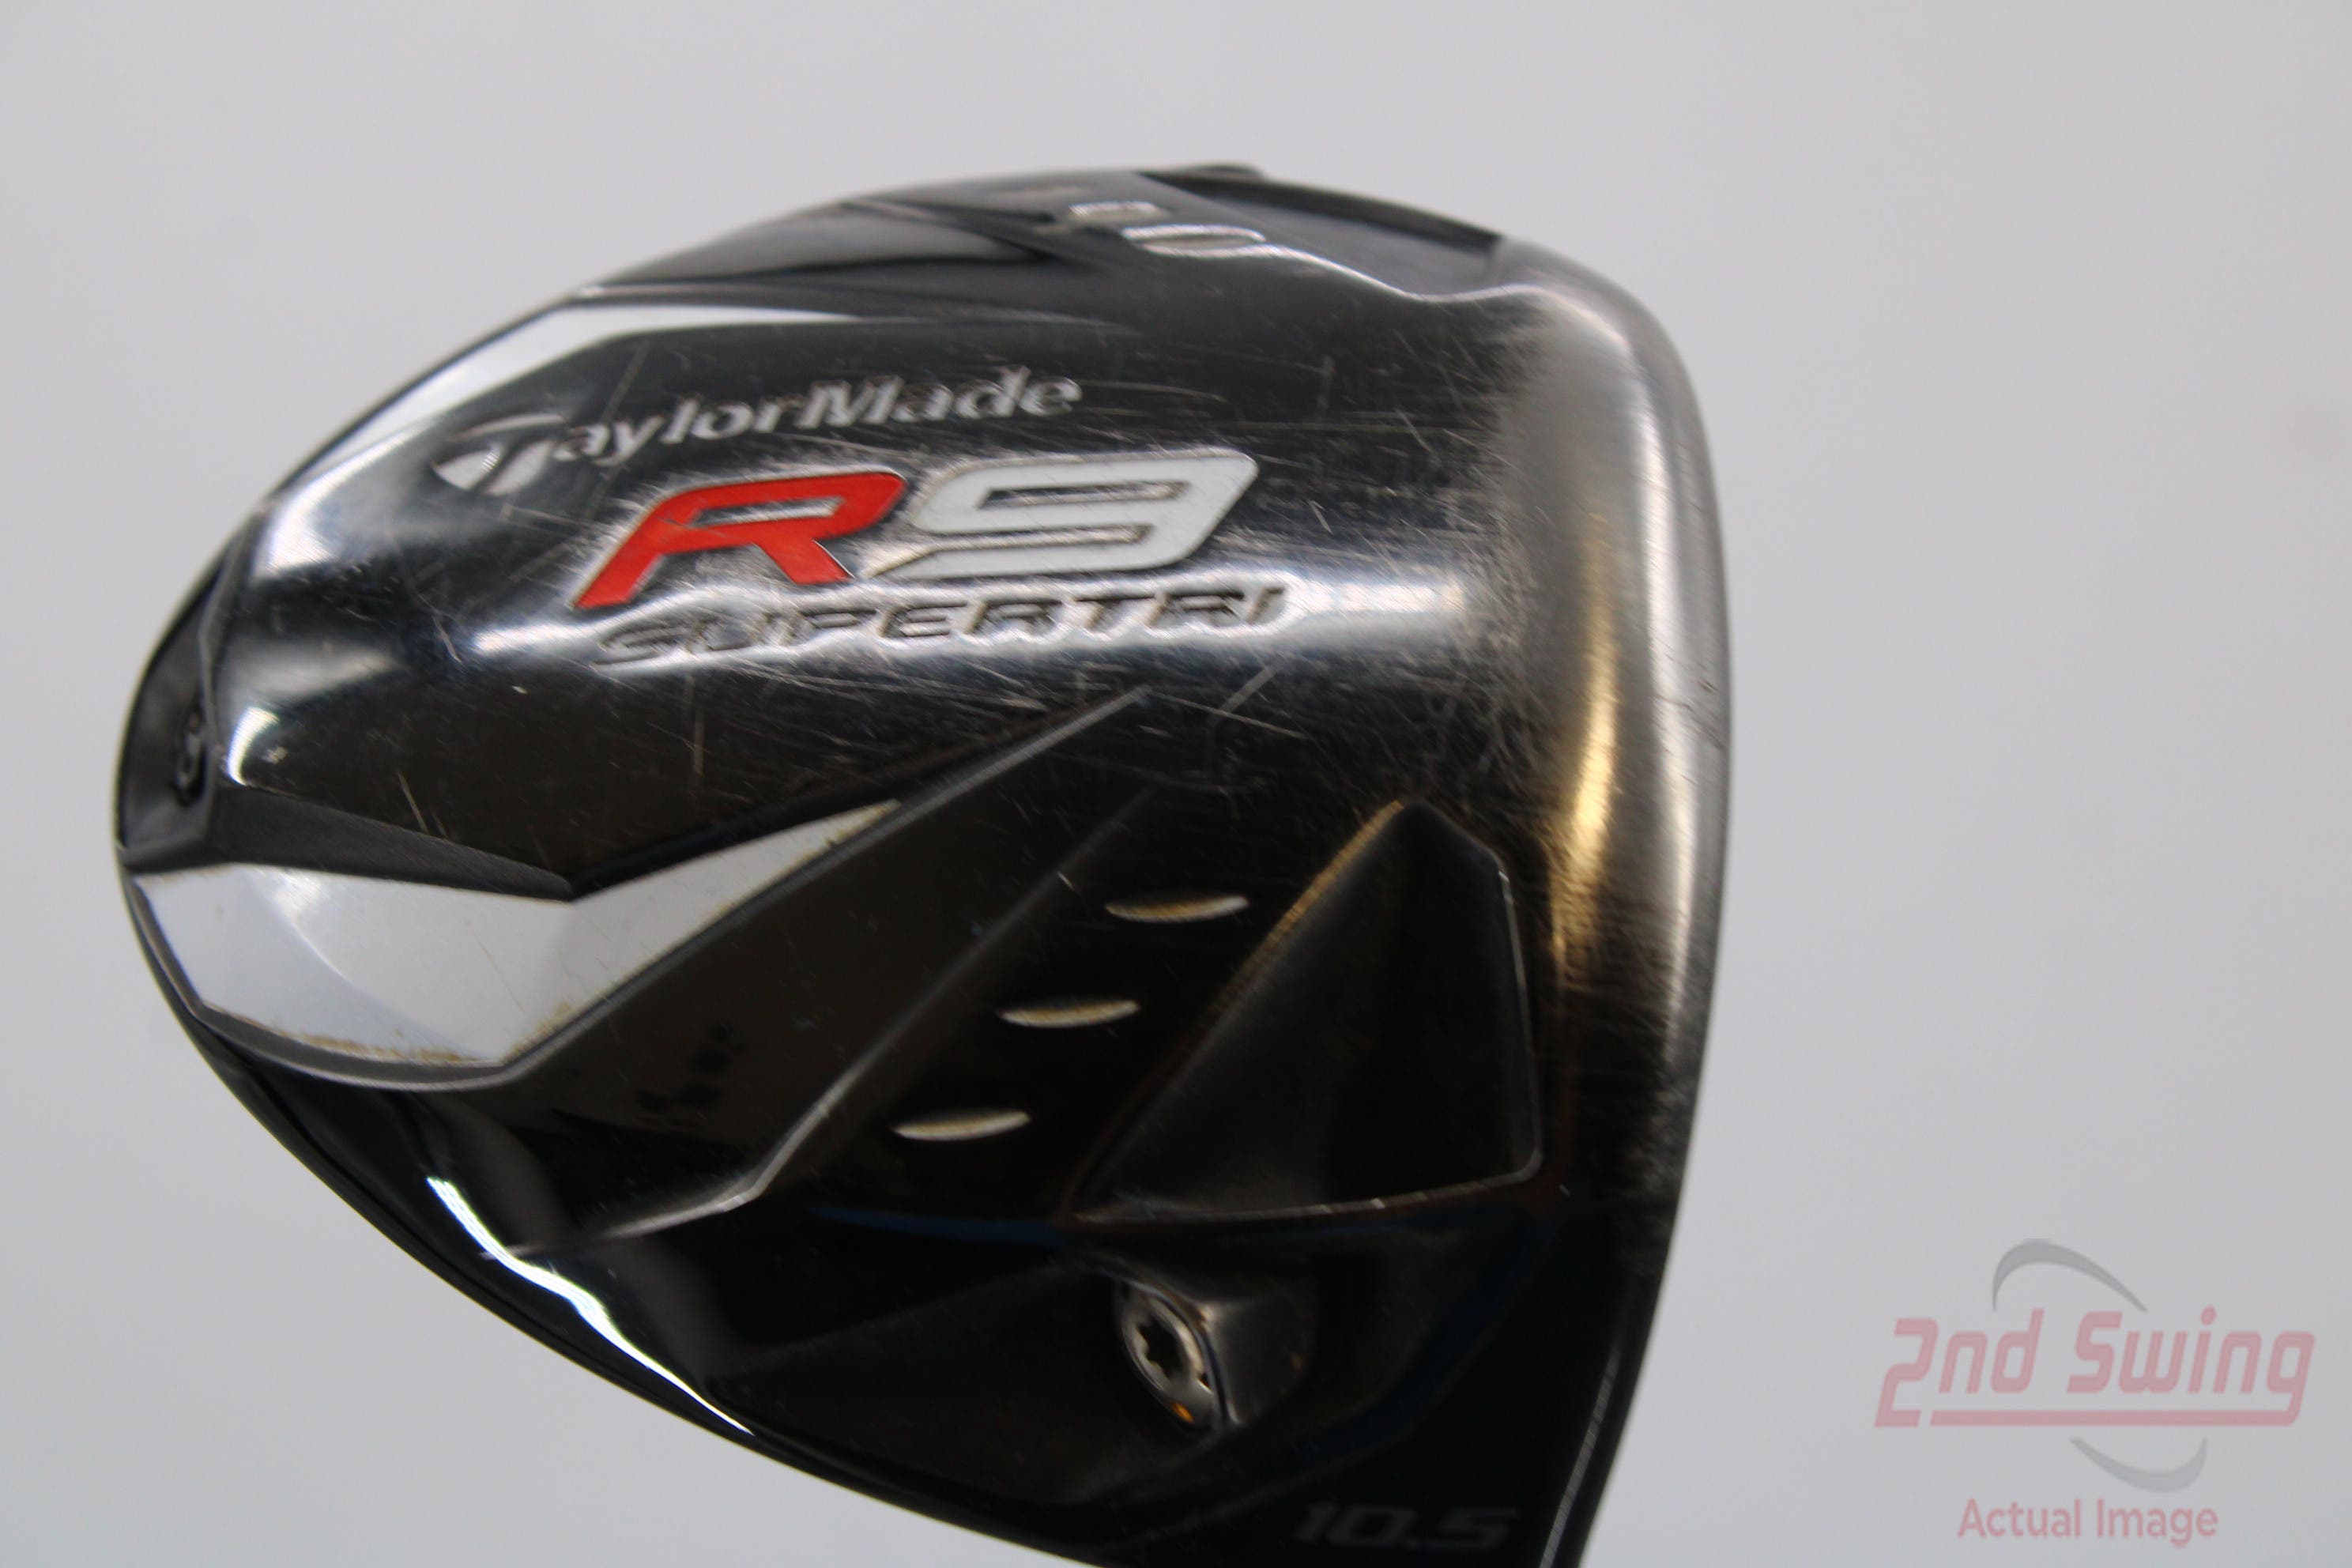 TaylorMade R9 SuperTri Driver | 2nd Swing Golf